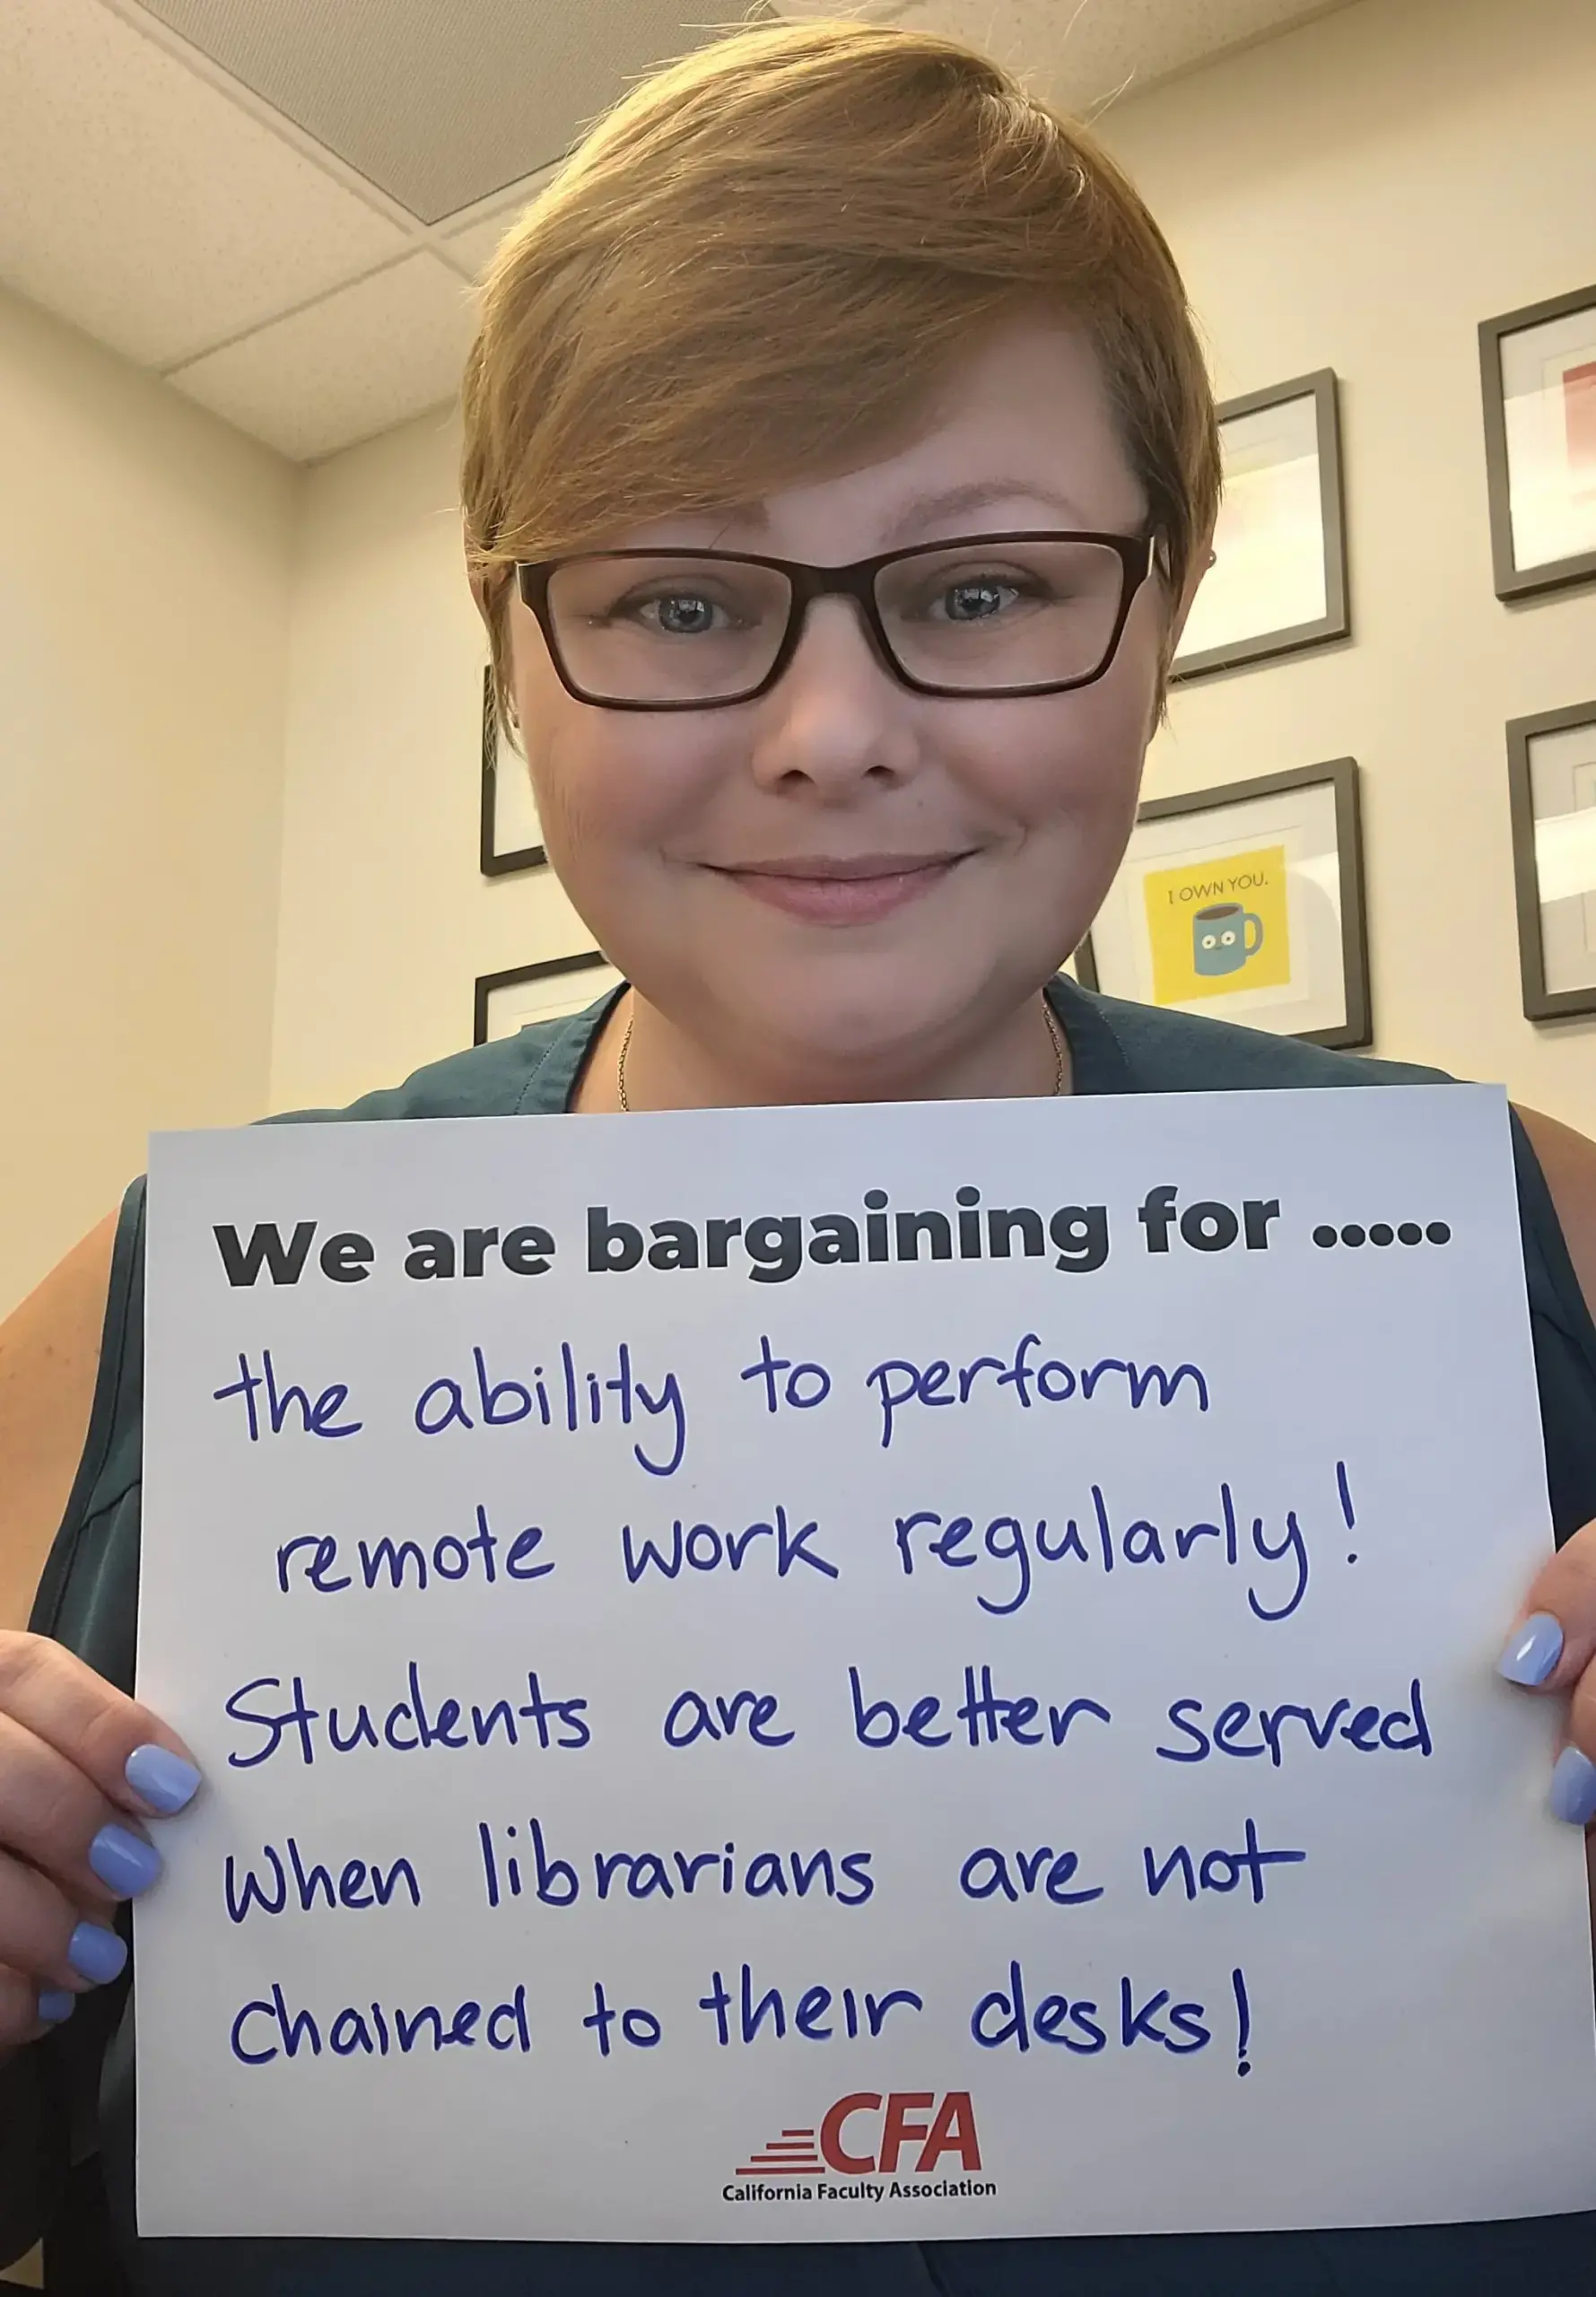 CFA member and CSU Domiguez Hills librarian for business administration, advocates for work schedule flexibility for all CSU librarians